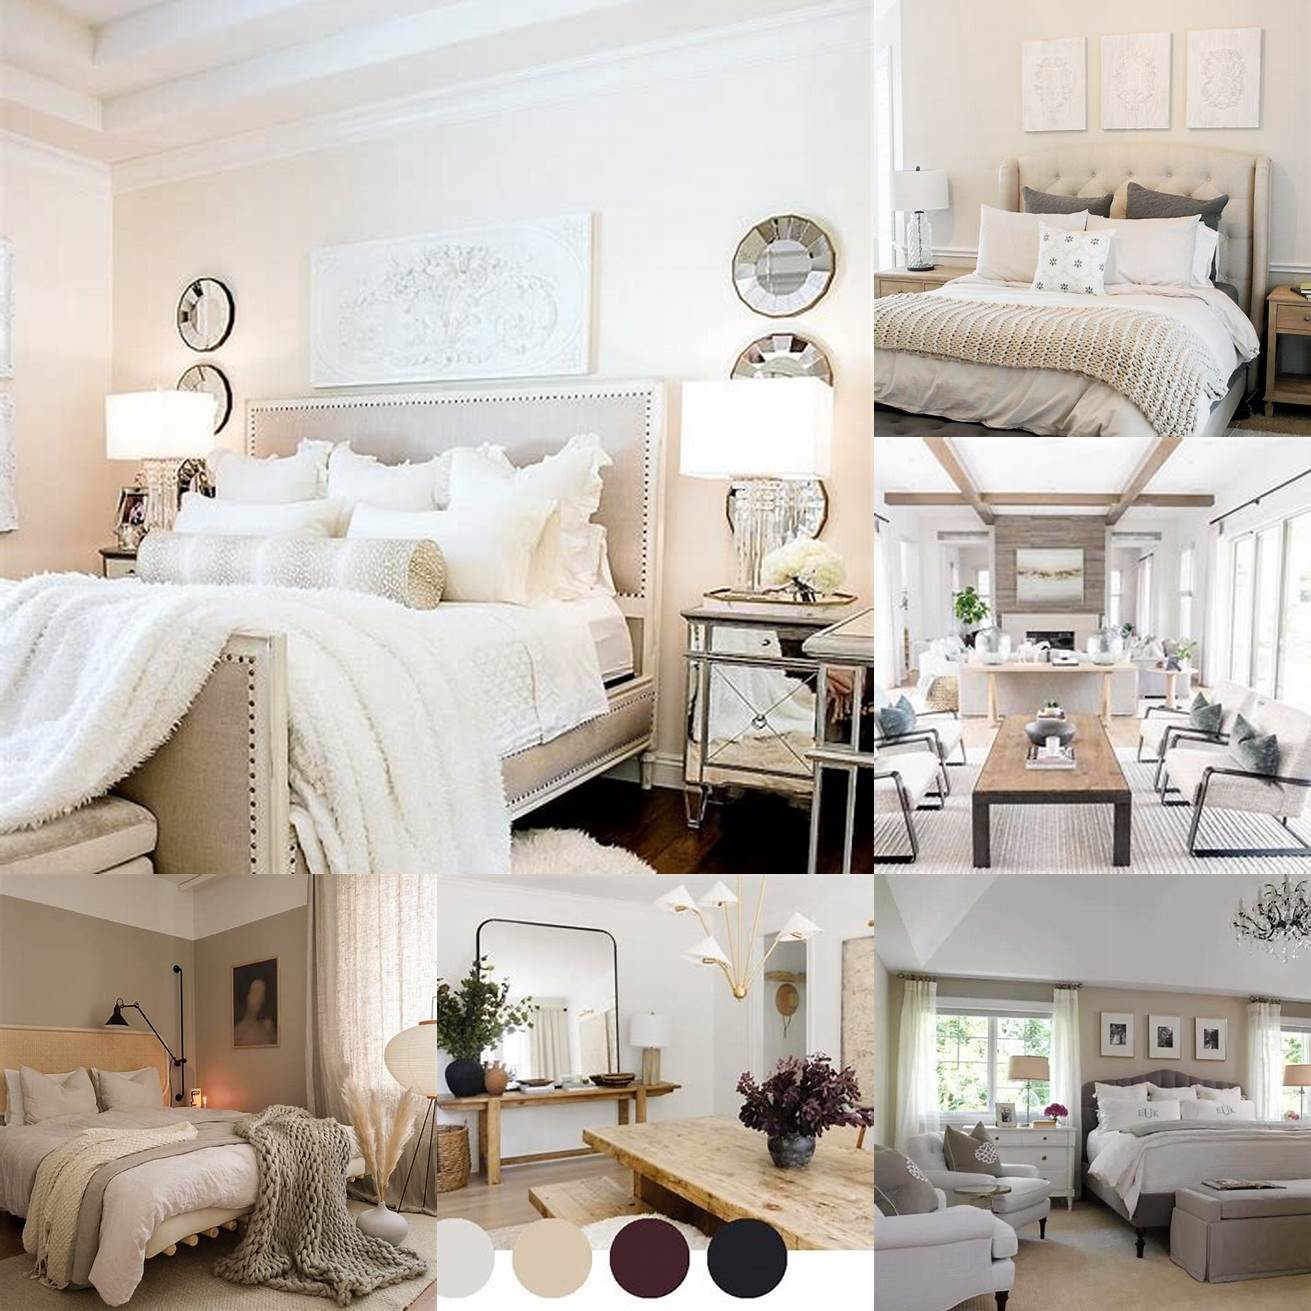 Neutral color palette with white bedding and wooden accents